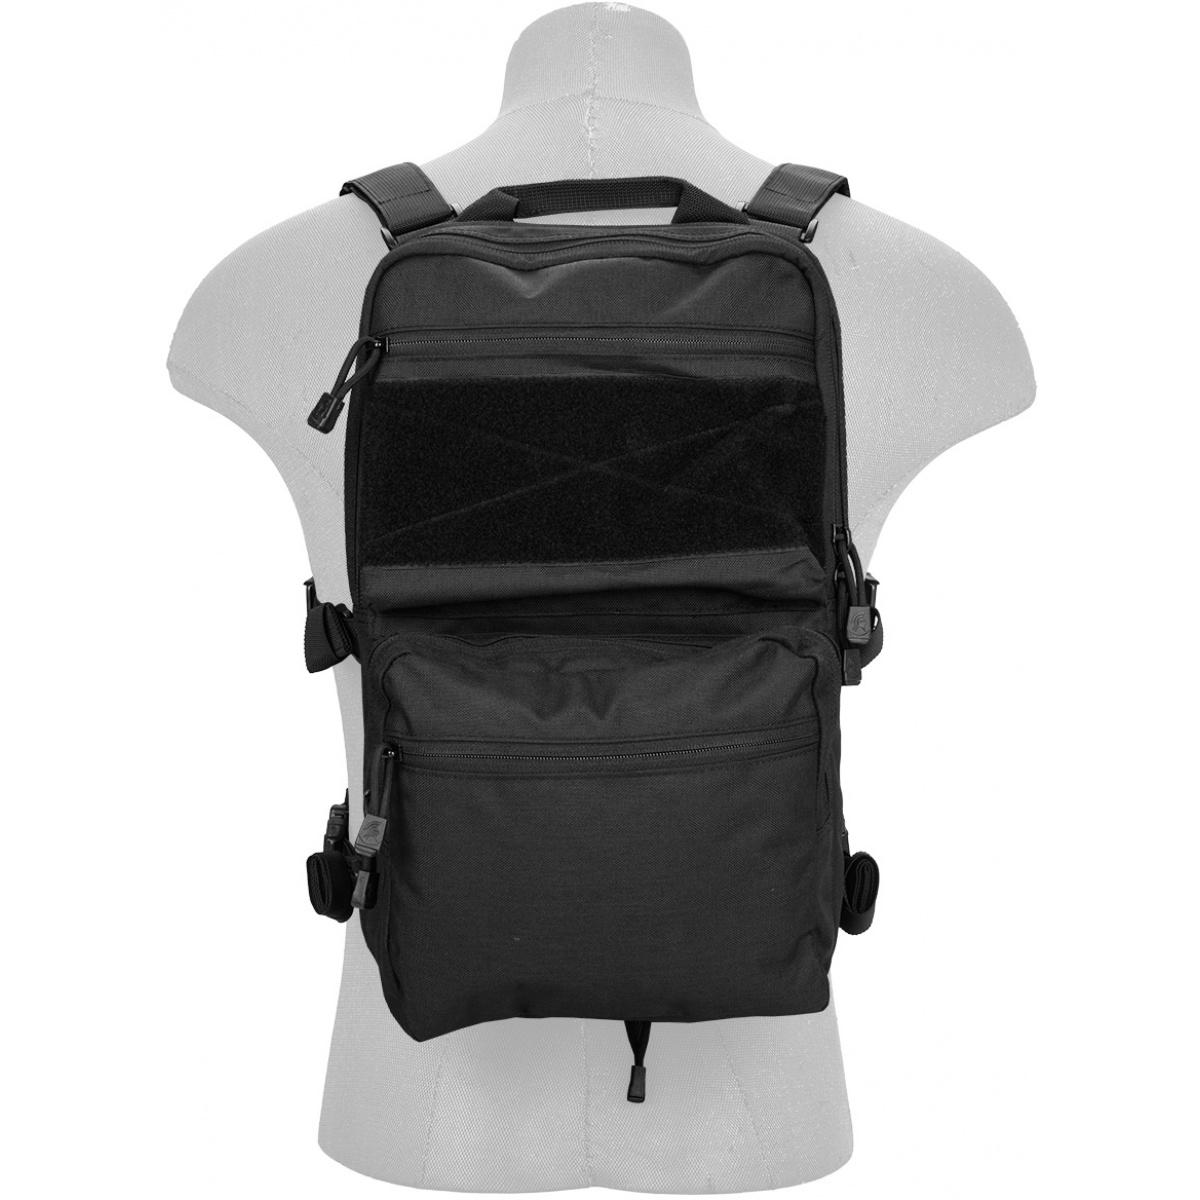 Lancer Tactical 1000D Nylon QD Chest Rig and Backpack Combo - BLACK ...